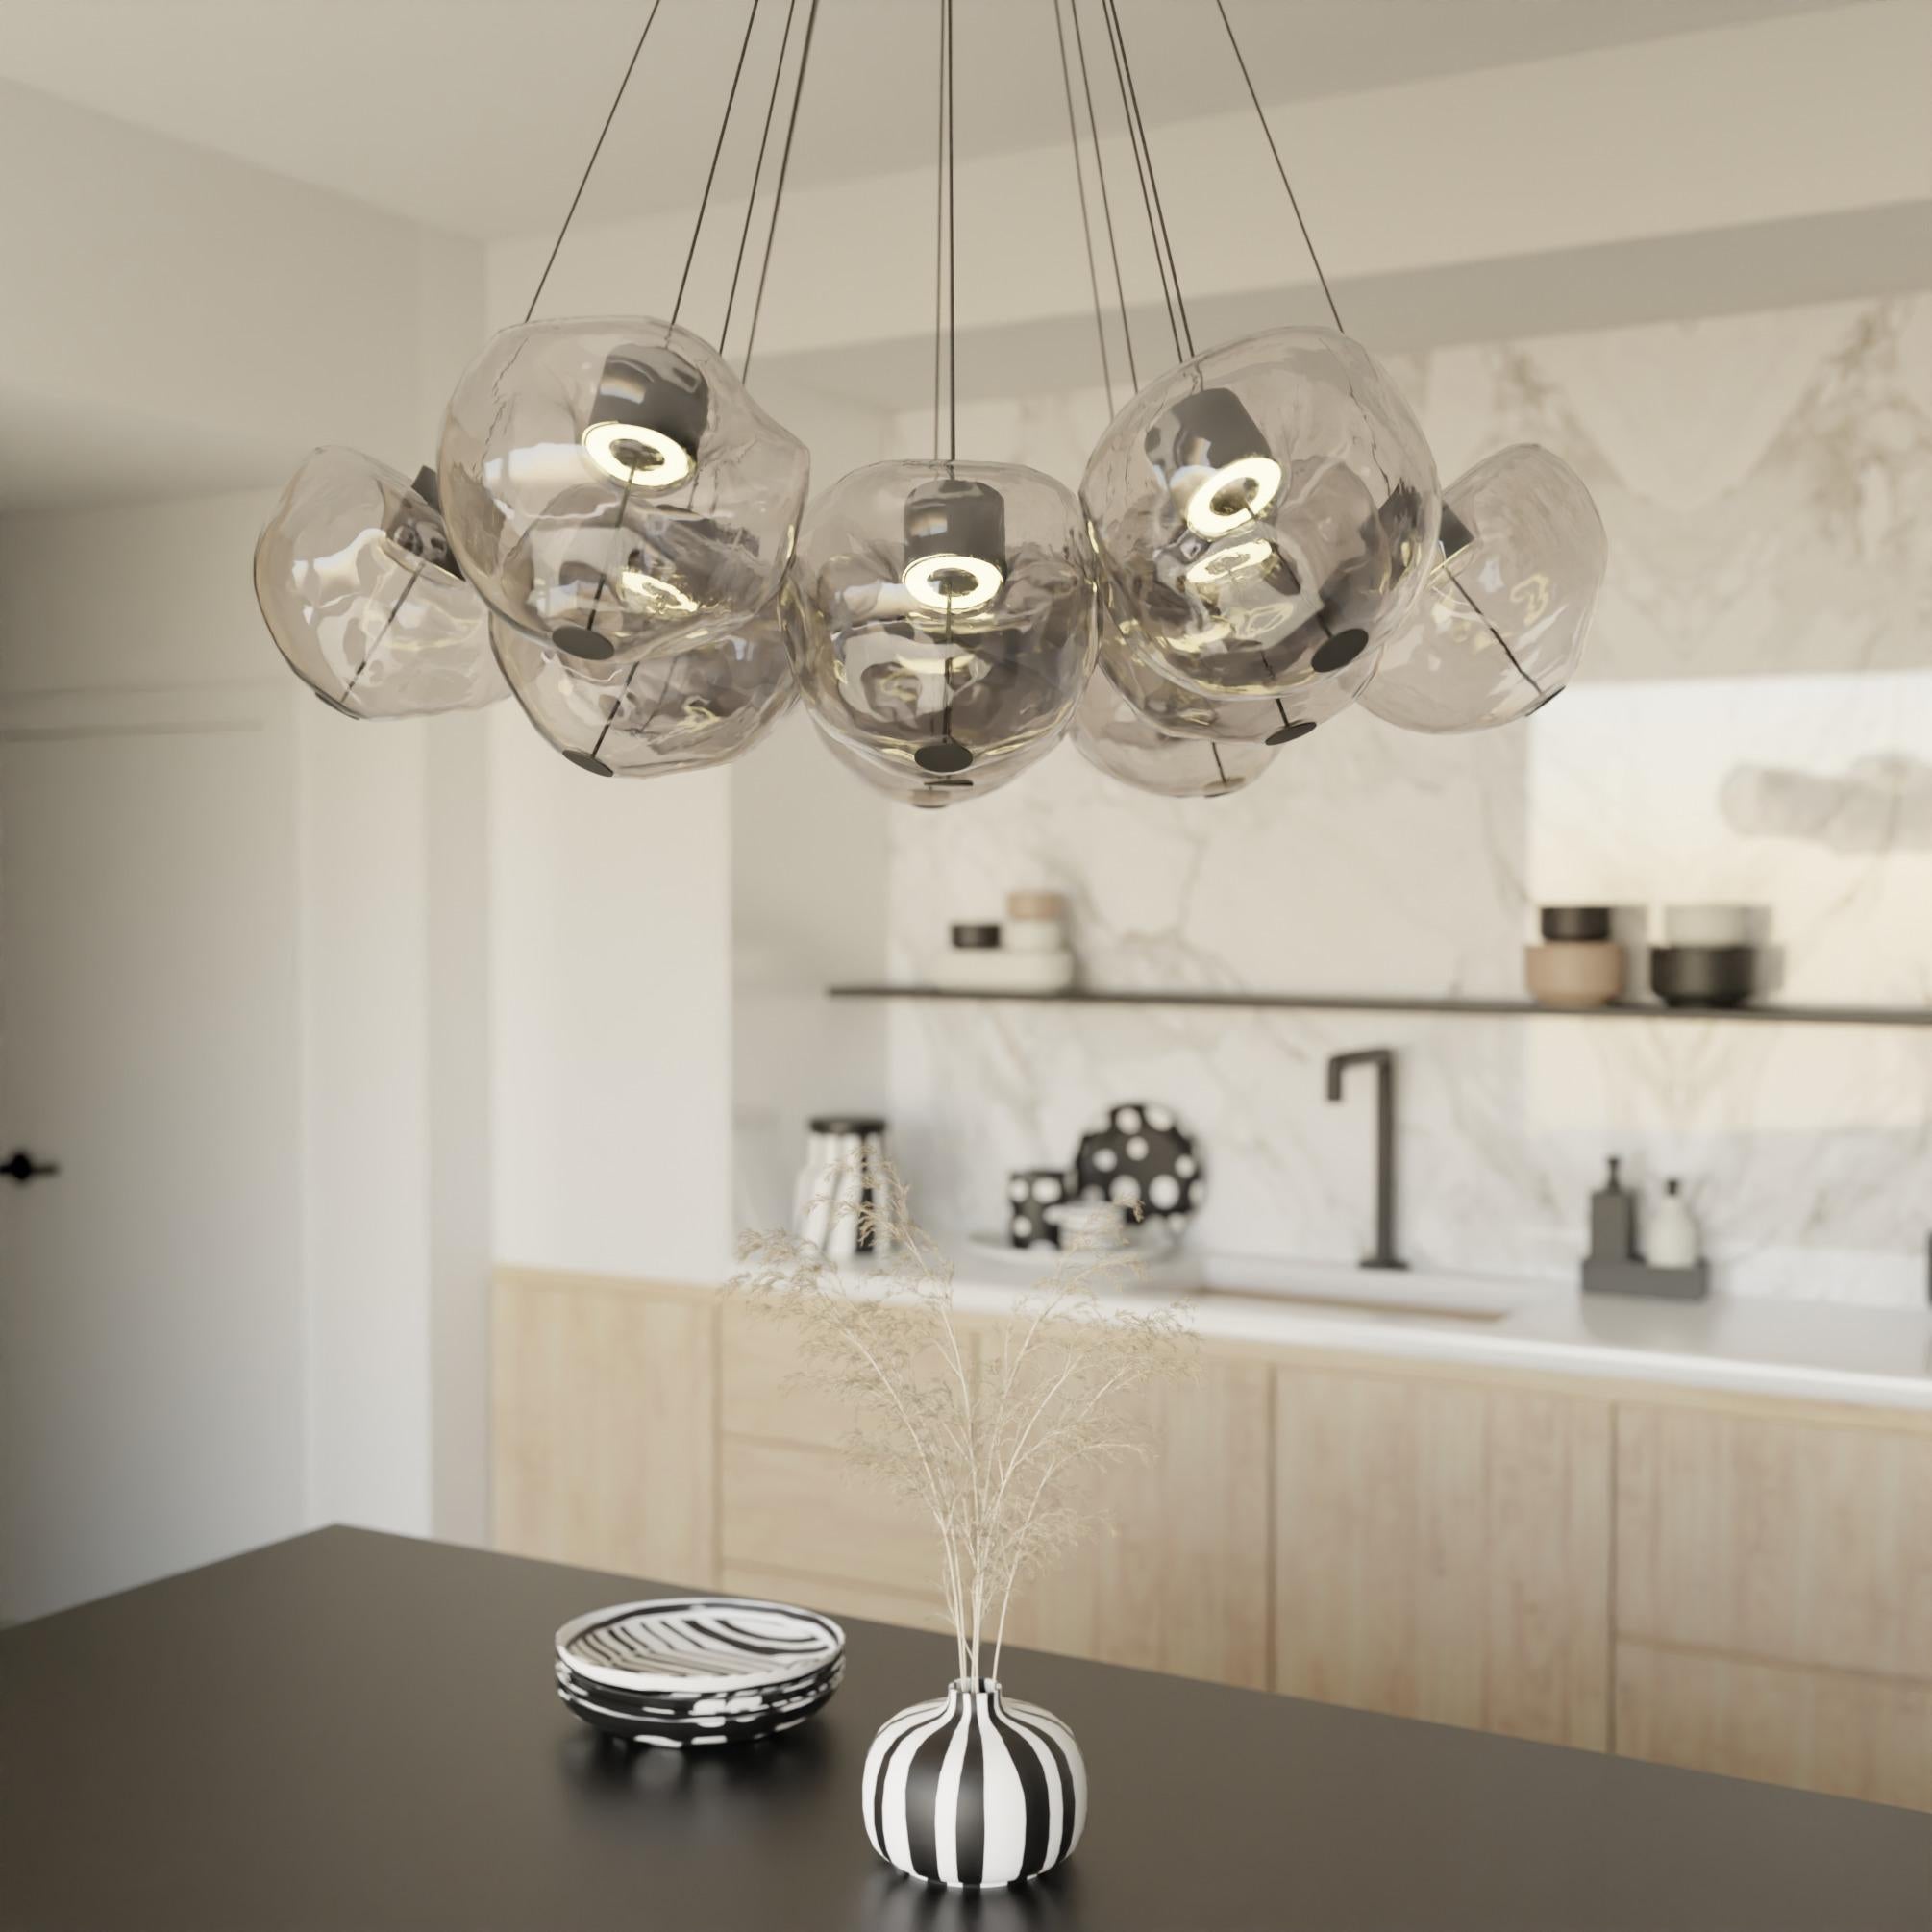 Italian 13 lights artistic Murano glass chandelier with amorphous spheres For Sale